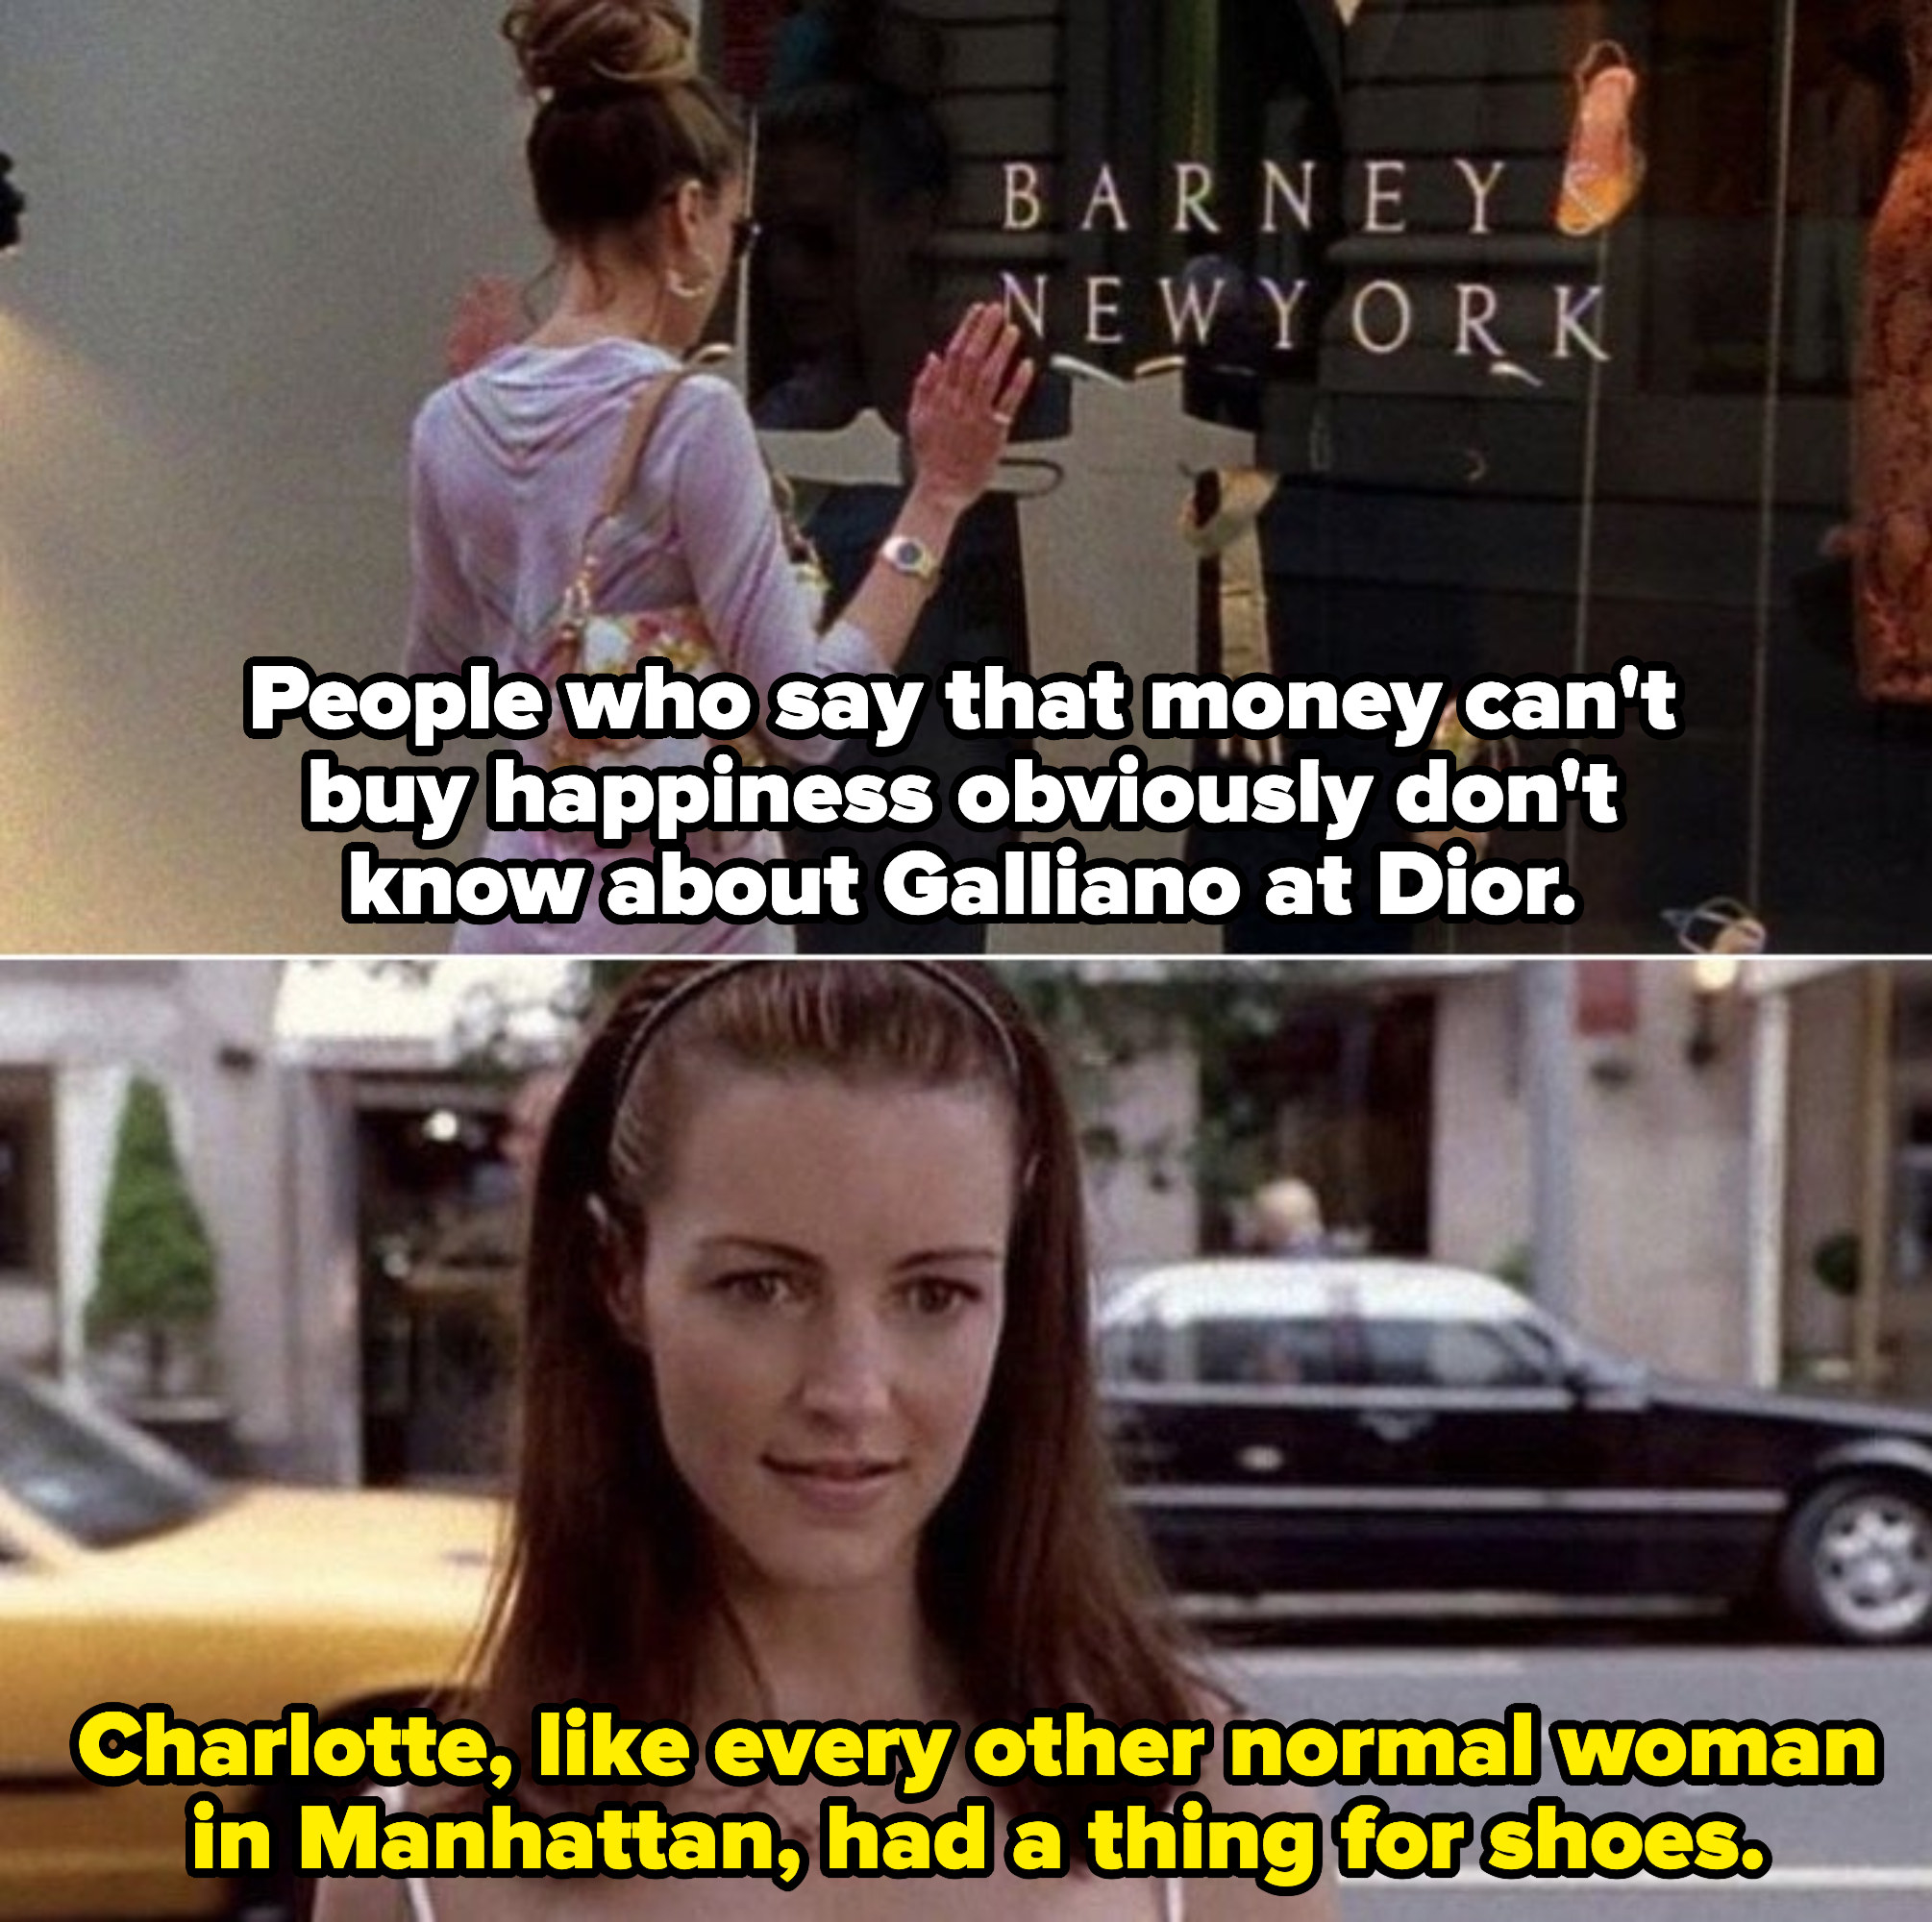 Carrie looking through a window: &quot;People who say that money can&#x27;t buy happiness obviously don&#x27;t know about galliano at Dior.&quot; Charlotte looking through a window: &quot;Charlotte, like every normal woman, had a thing for shoes&quot;